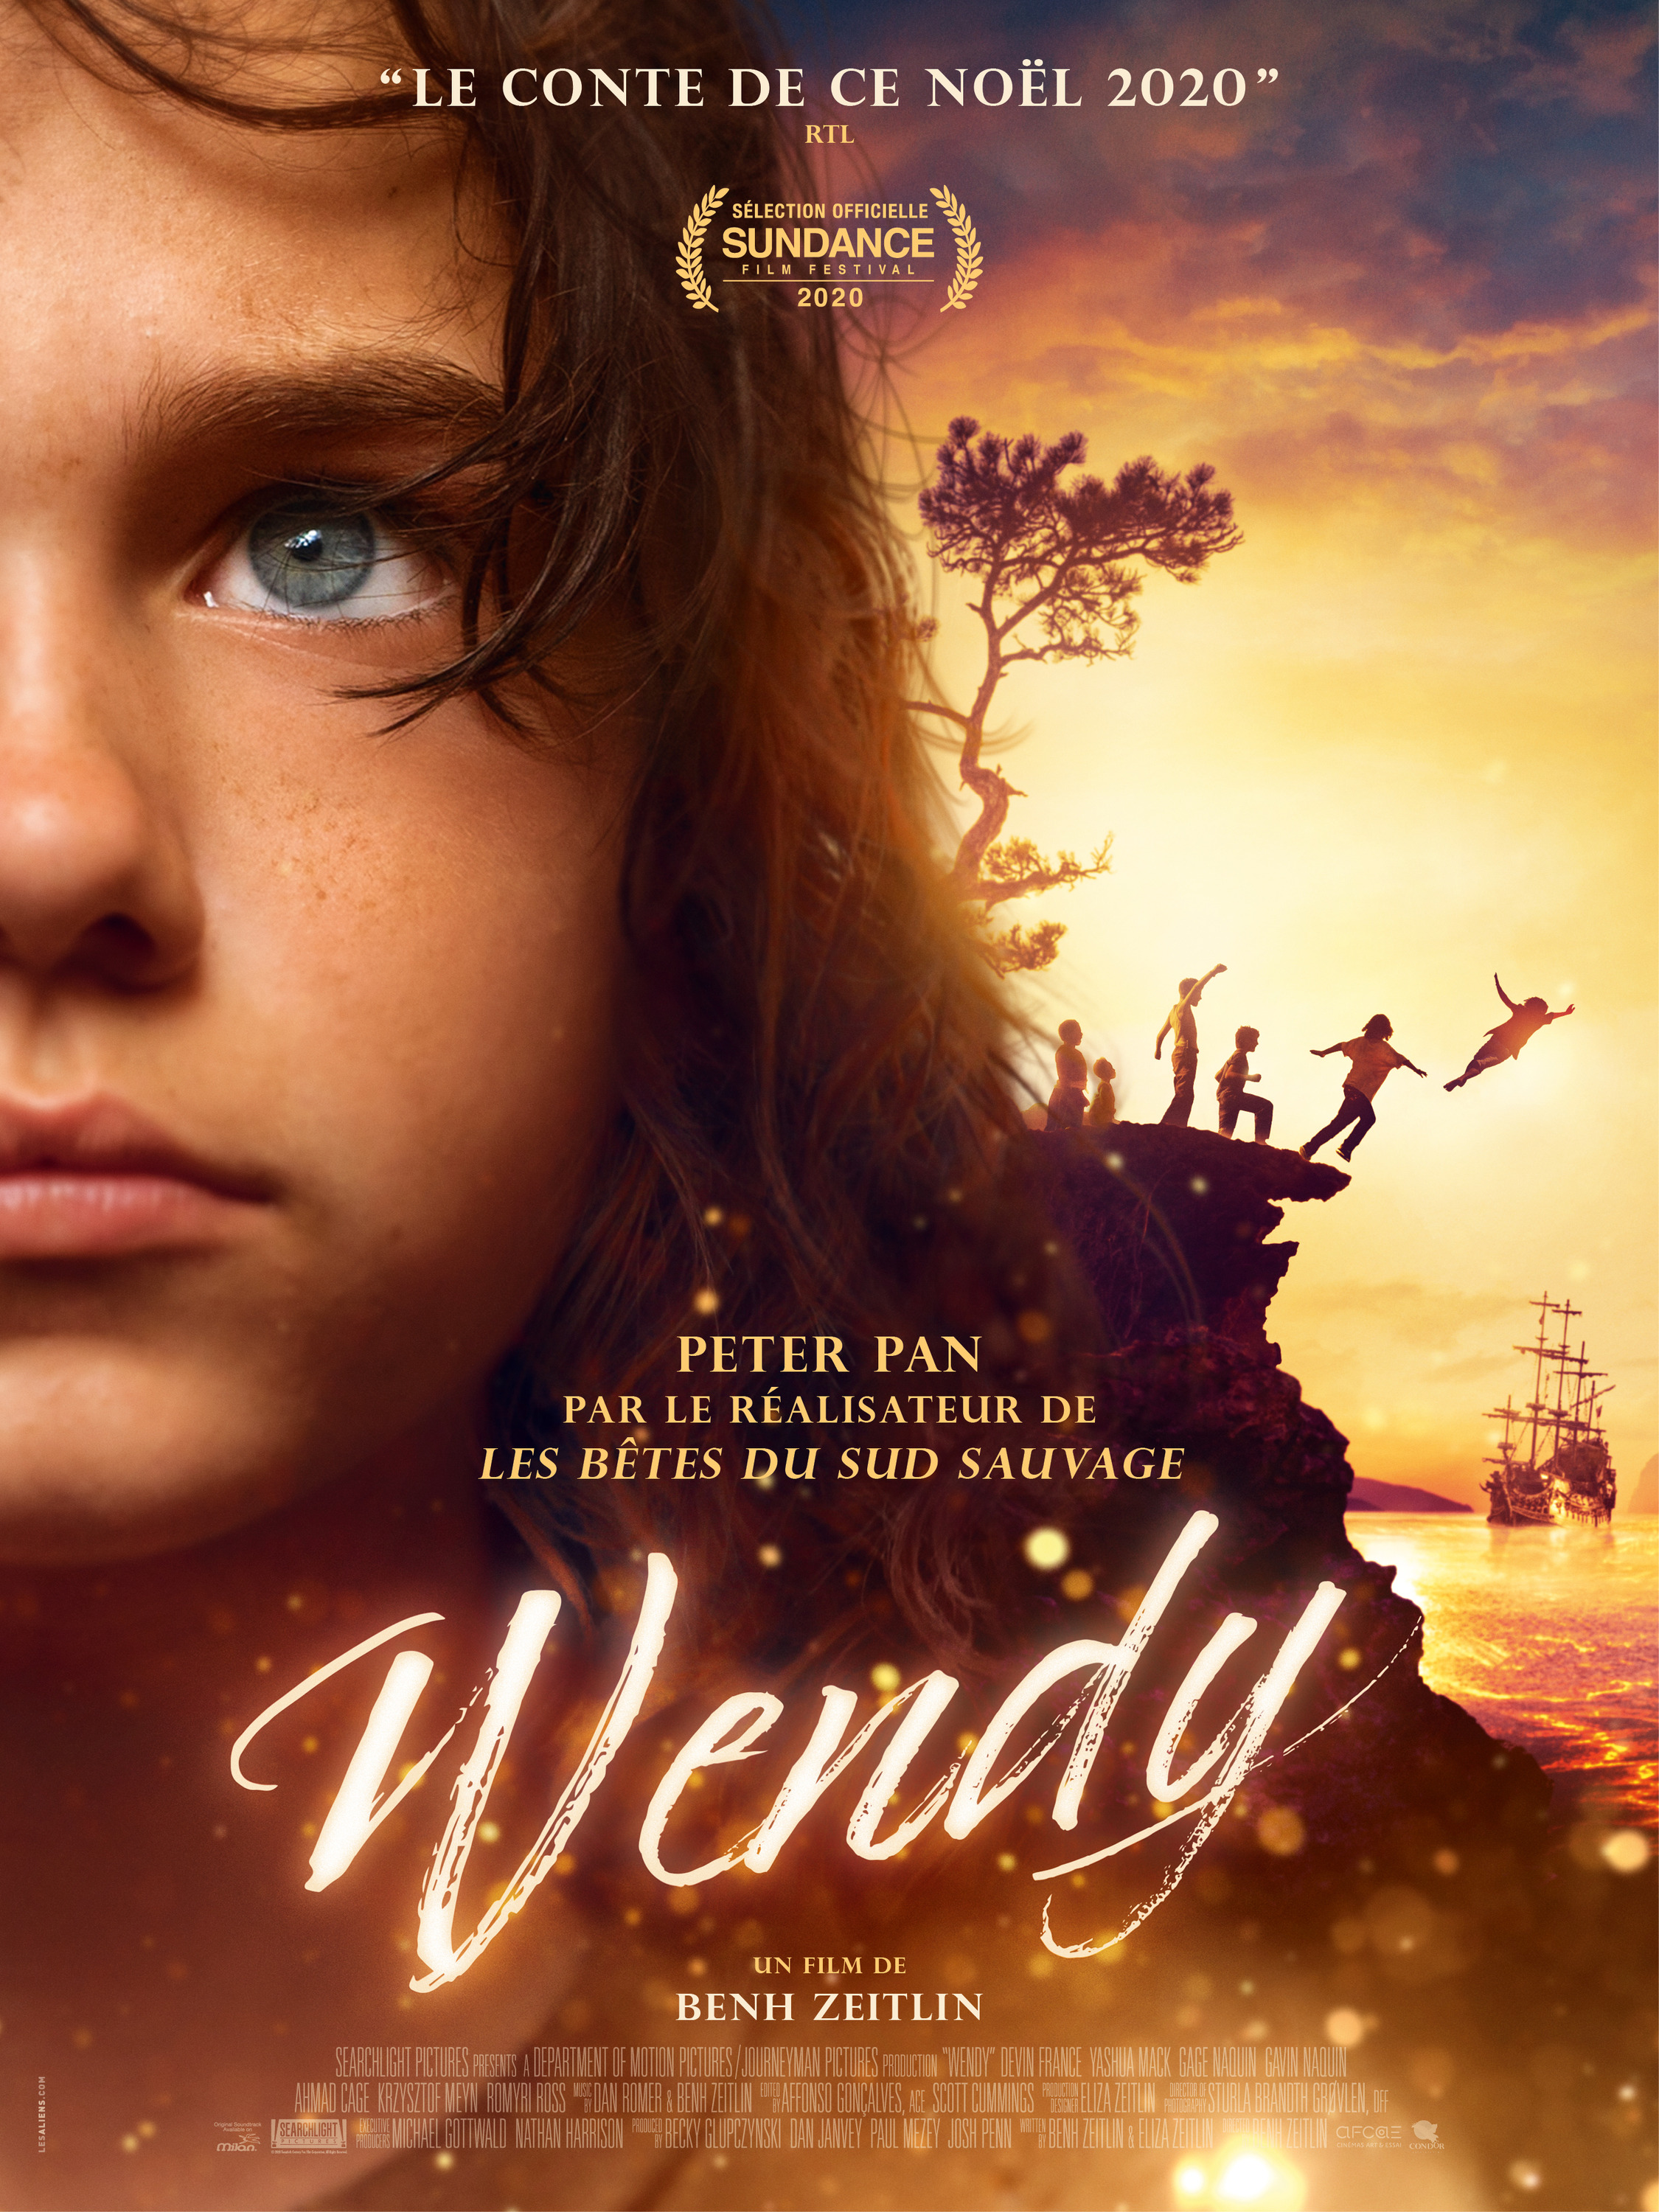 Mega Sized Movie Poster Image for Wendy (#4 of 4)